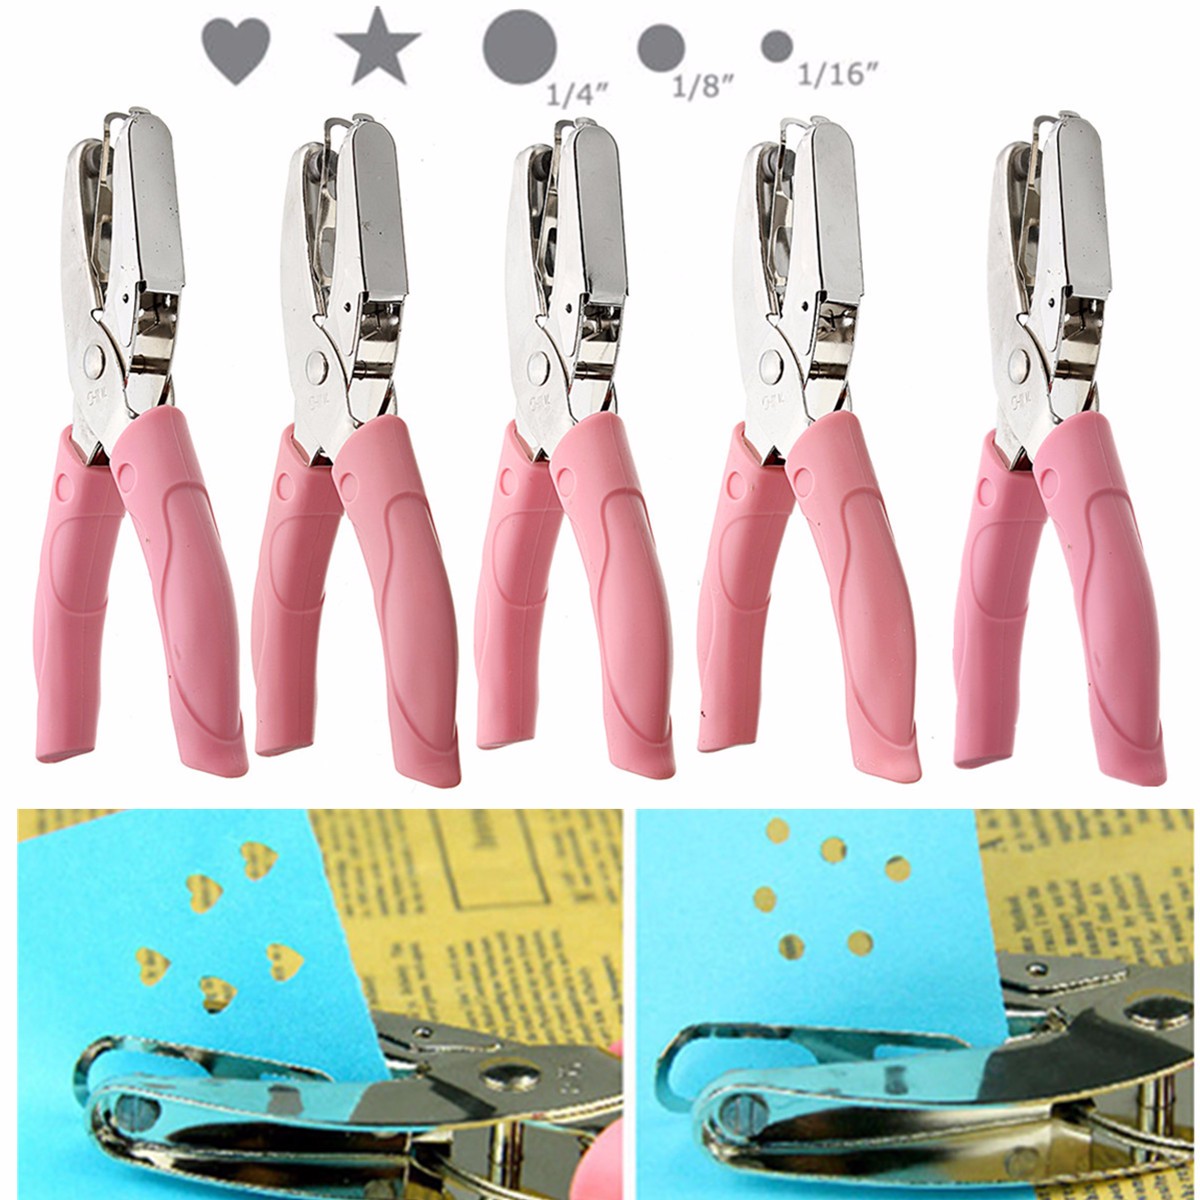 155mm-Stainless-Steel-Manual-Hole-Puncher-Pliers-DIY-Hand-Tool---5-Size-1089892-1